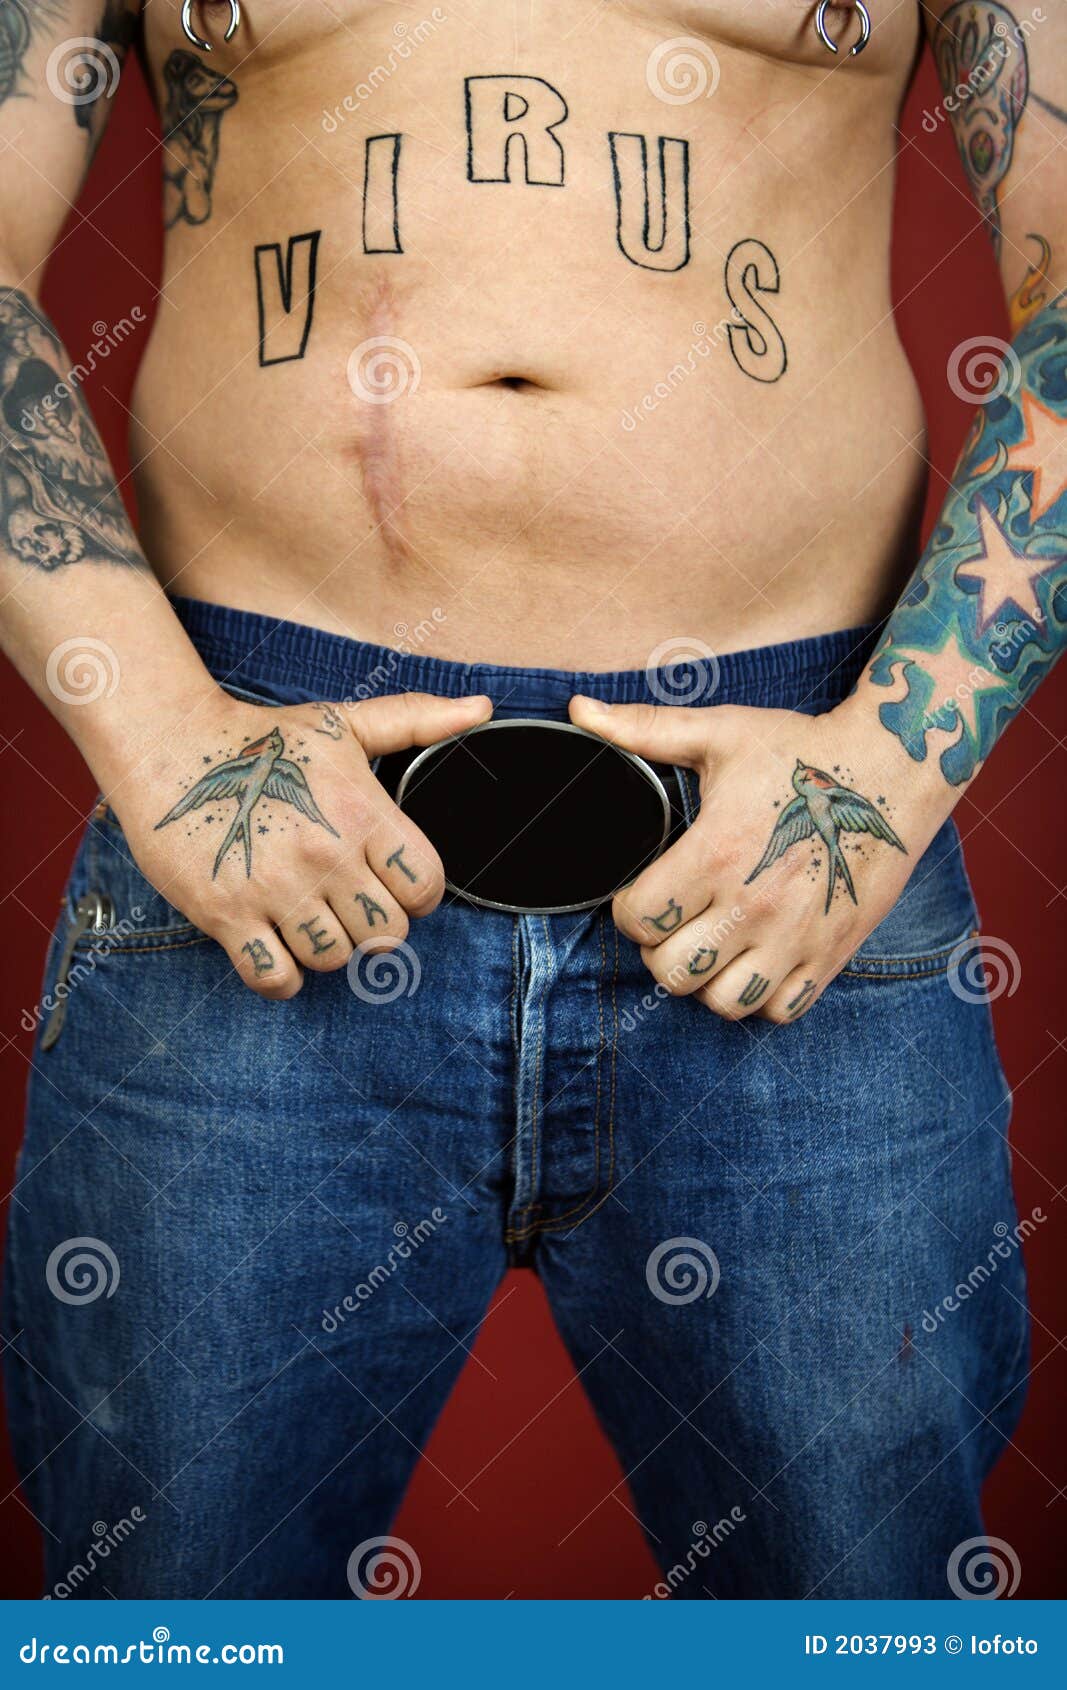 25 attractive belly tattoo designs for men and women 